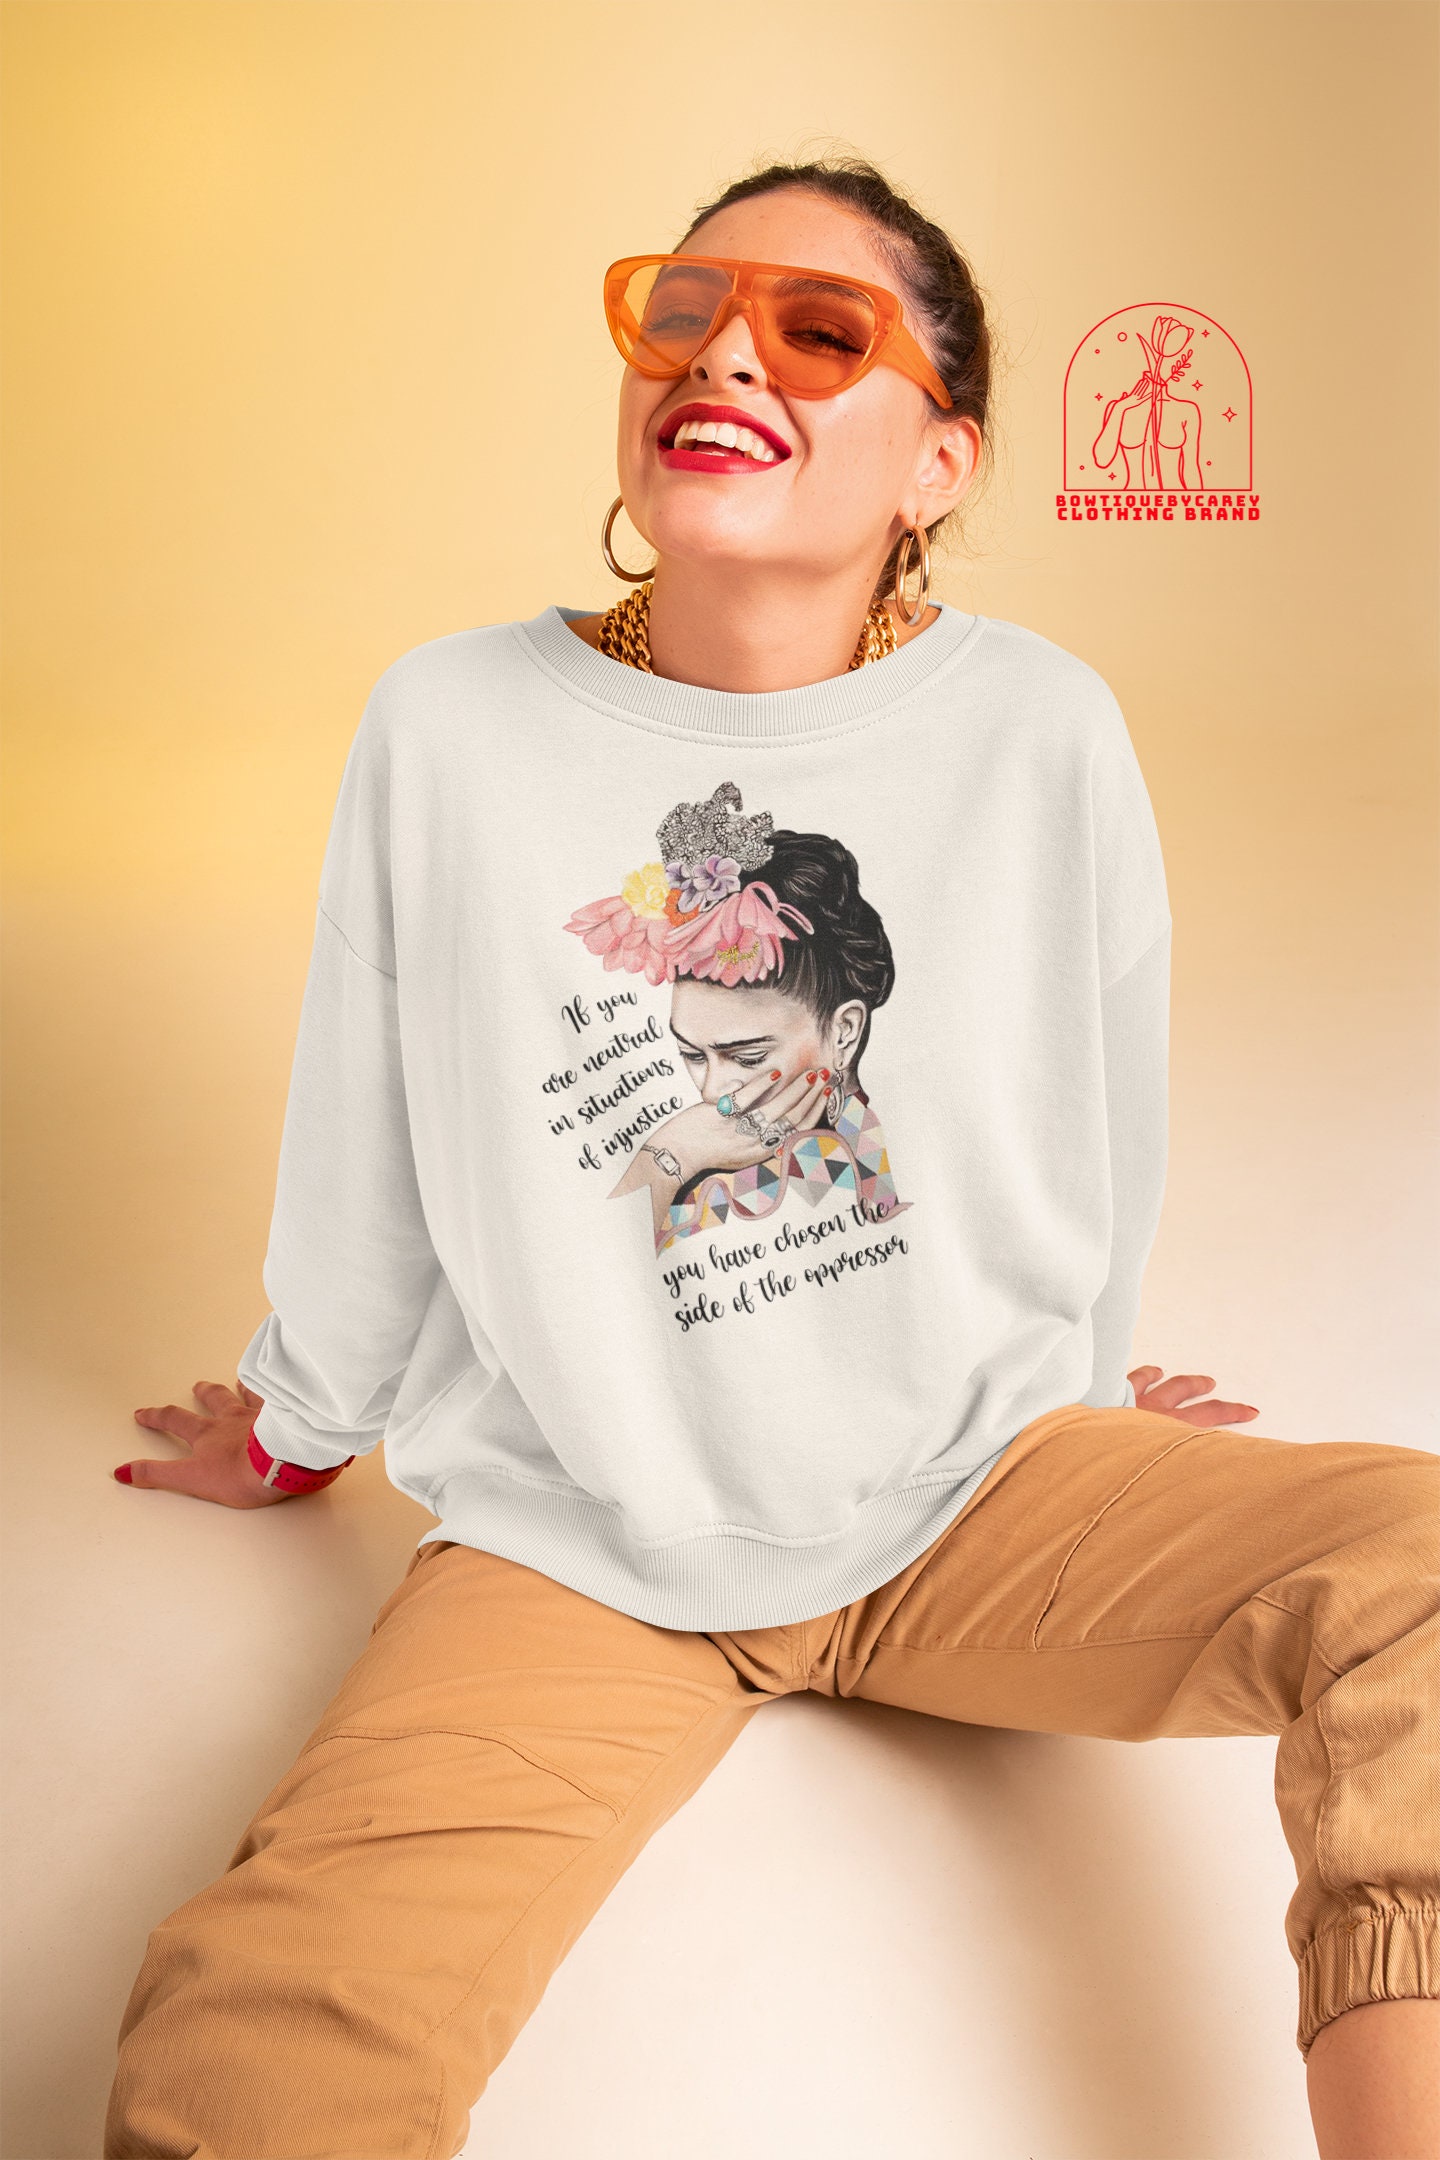 Frida Kahlo If You Are Neutral In Situations Of Injustice Frida Kahlo Feminist Women Rights Unisex T-Shirt